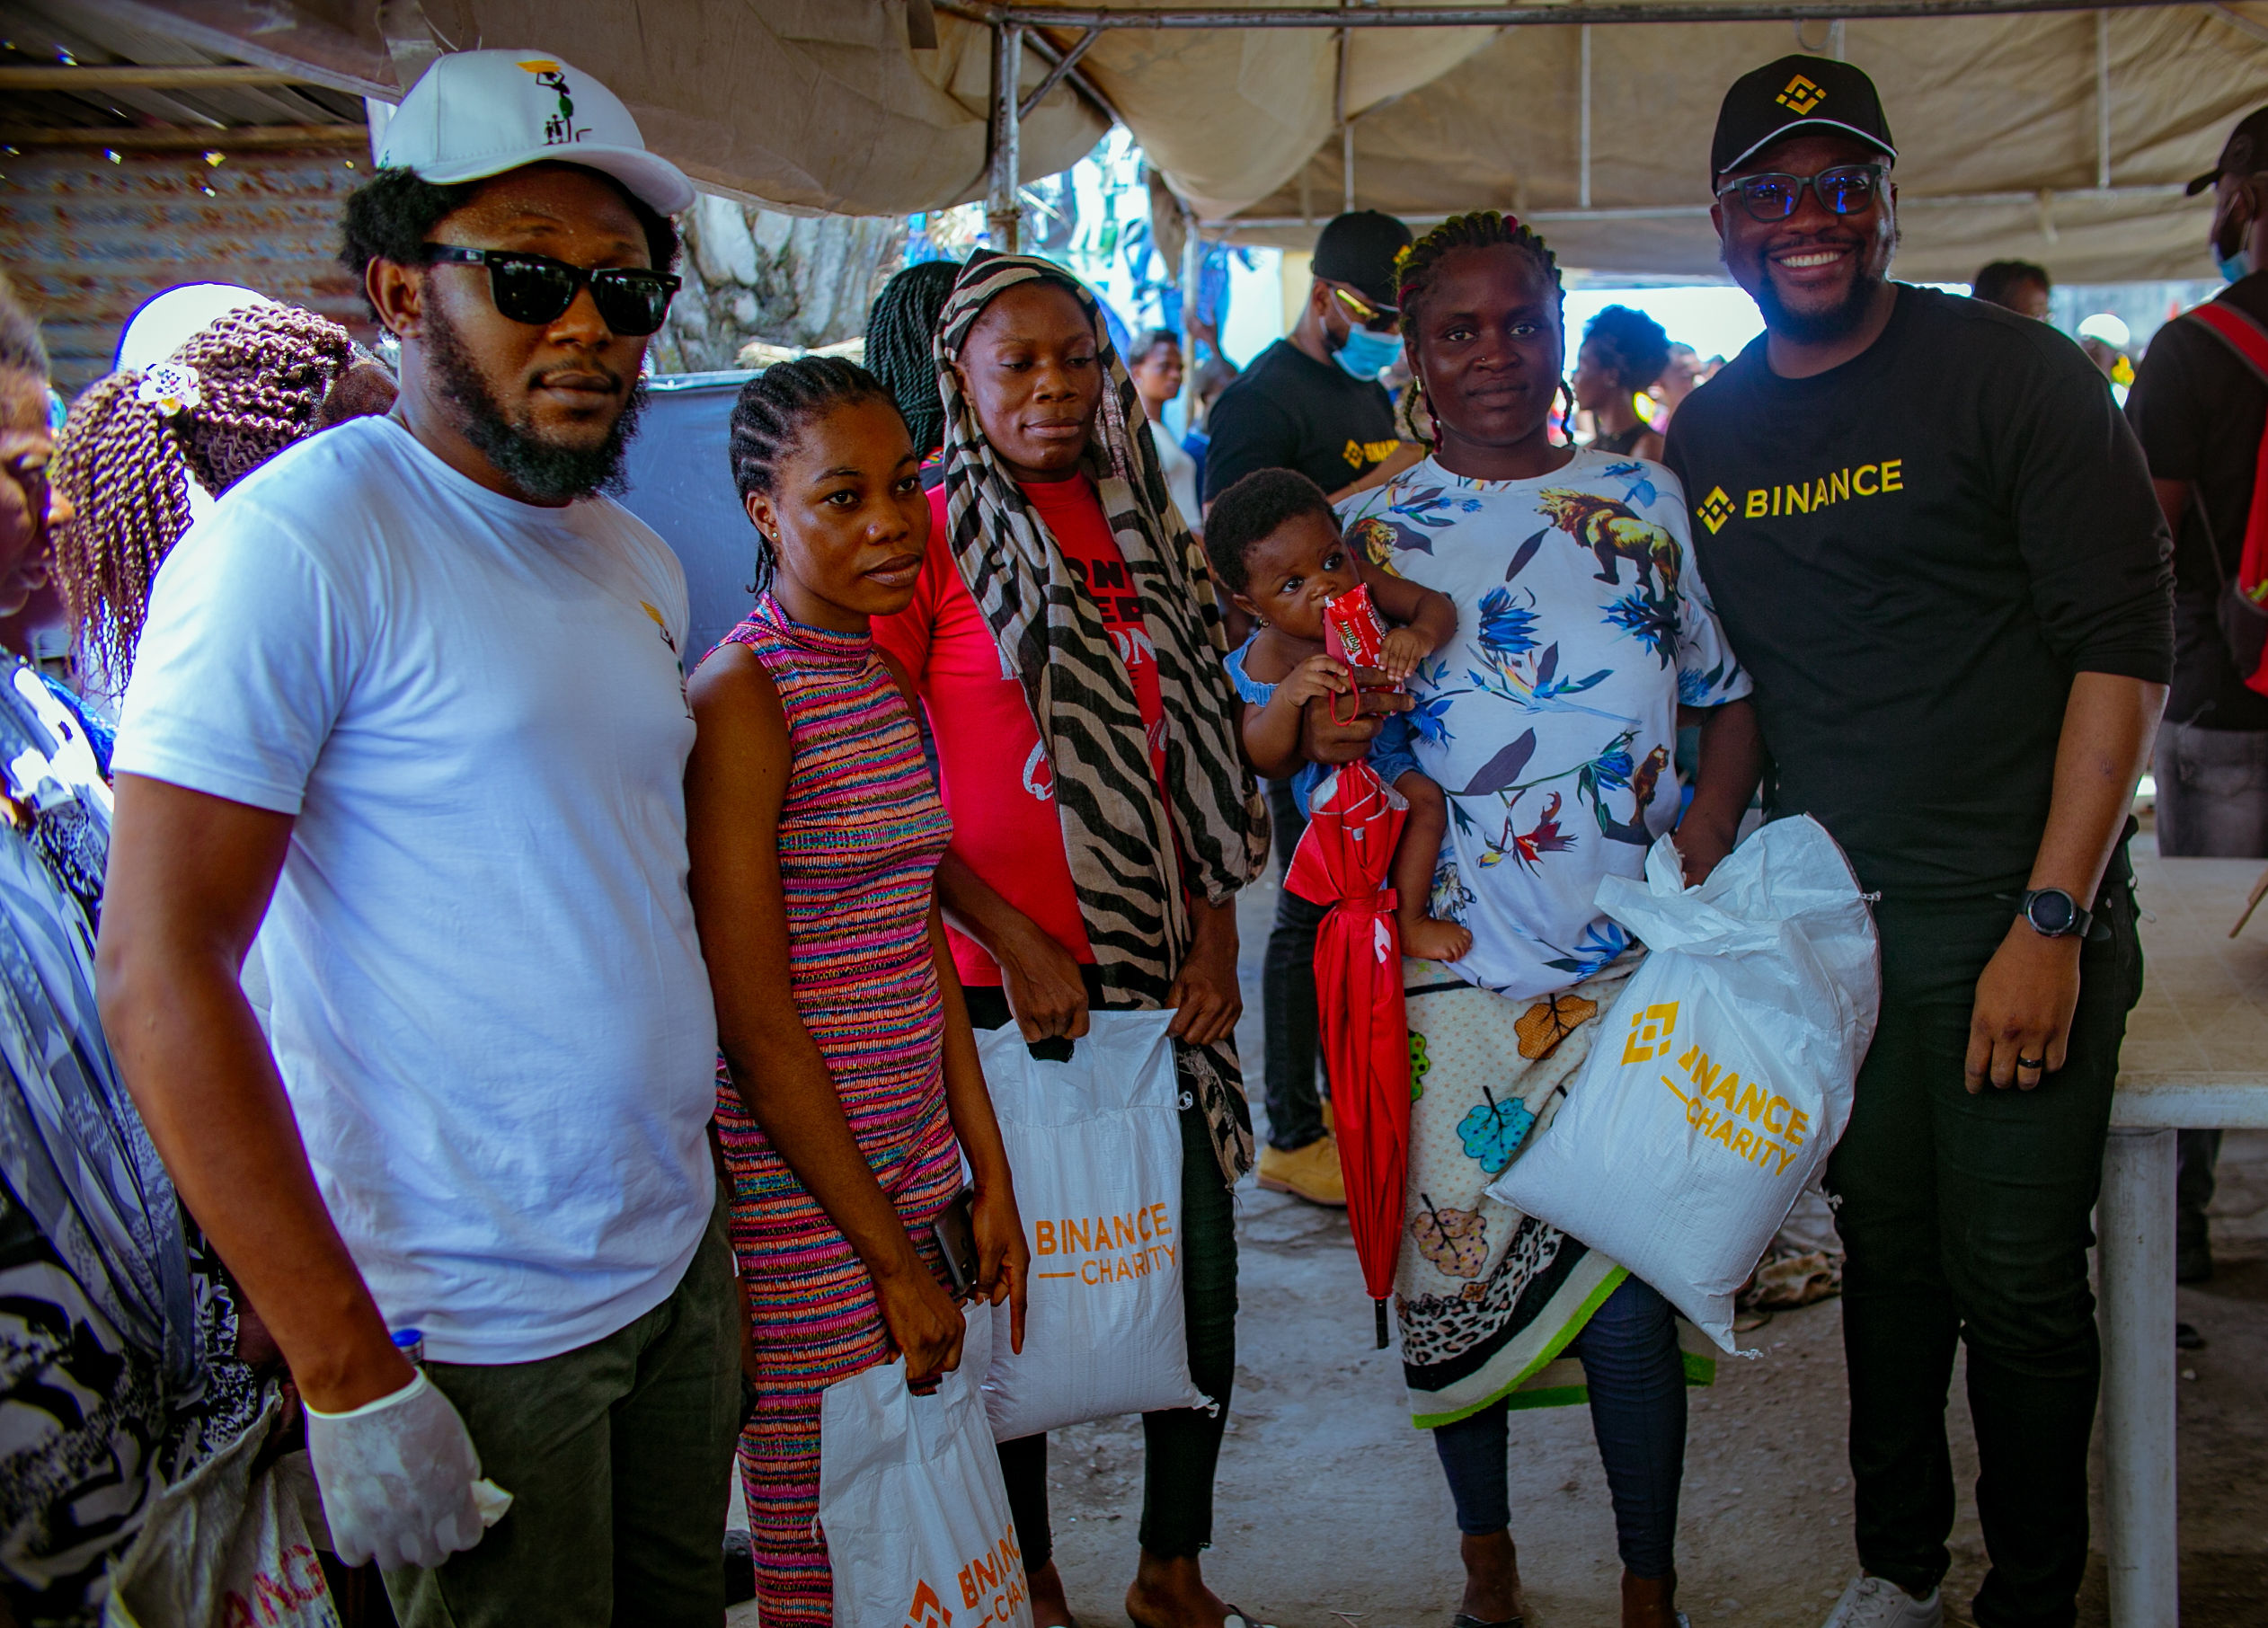 Binance Charity partnered with Trinitas Foundation to provide food for families in need in Lagos this Easter season.